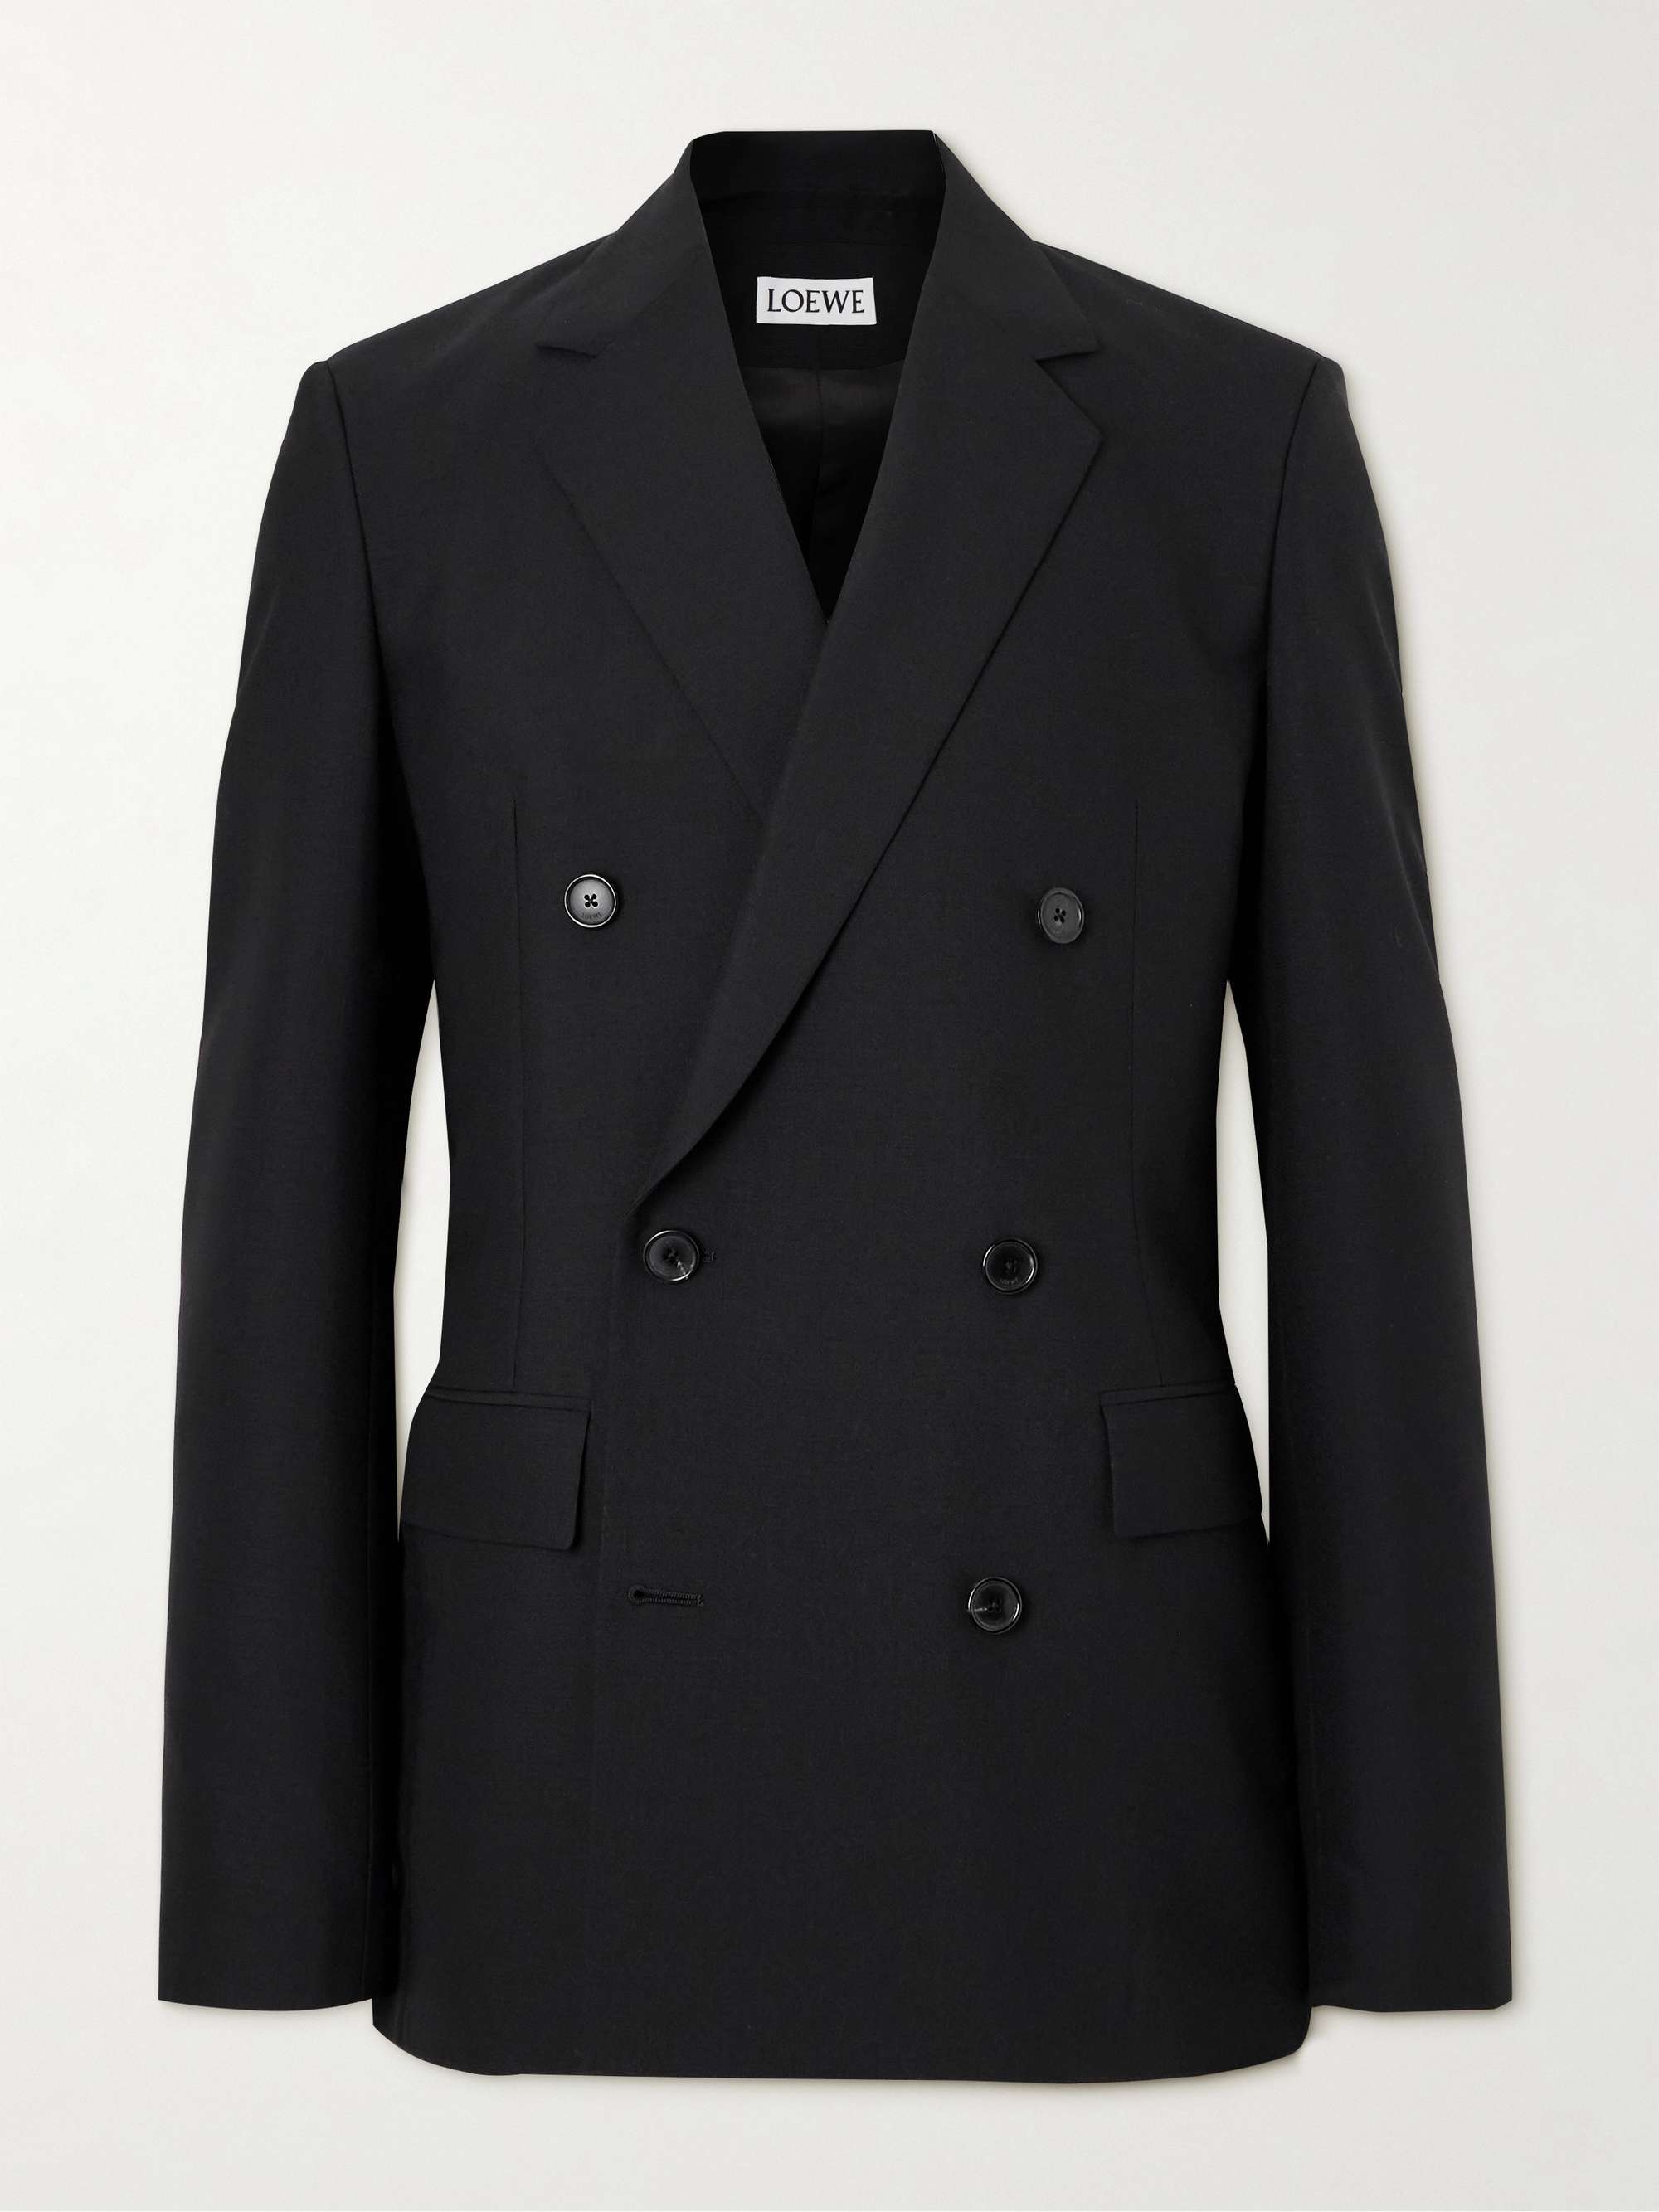 LOEWE Double-Breasted Wool and Mohair-Blend Suit Jacket for Men | MR PORTER